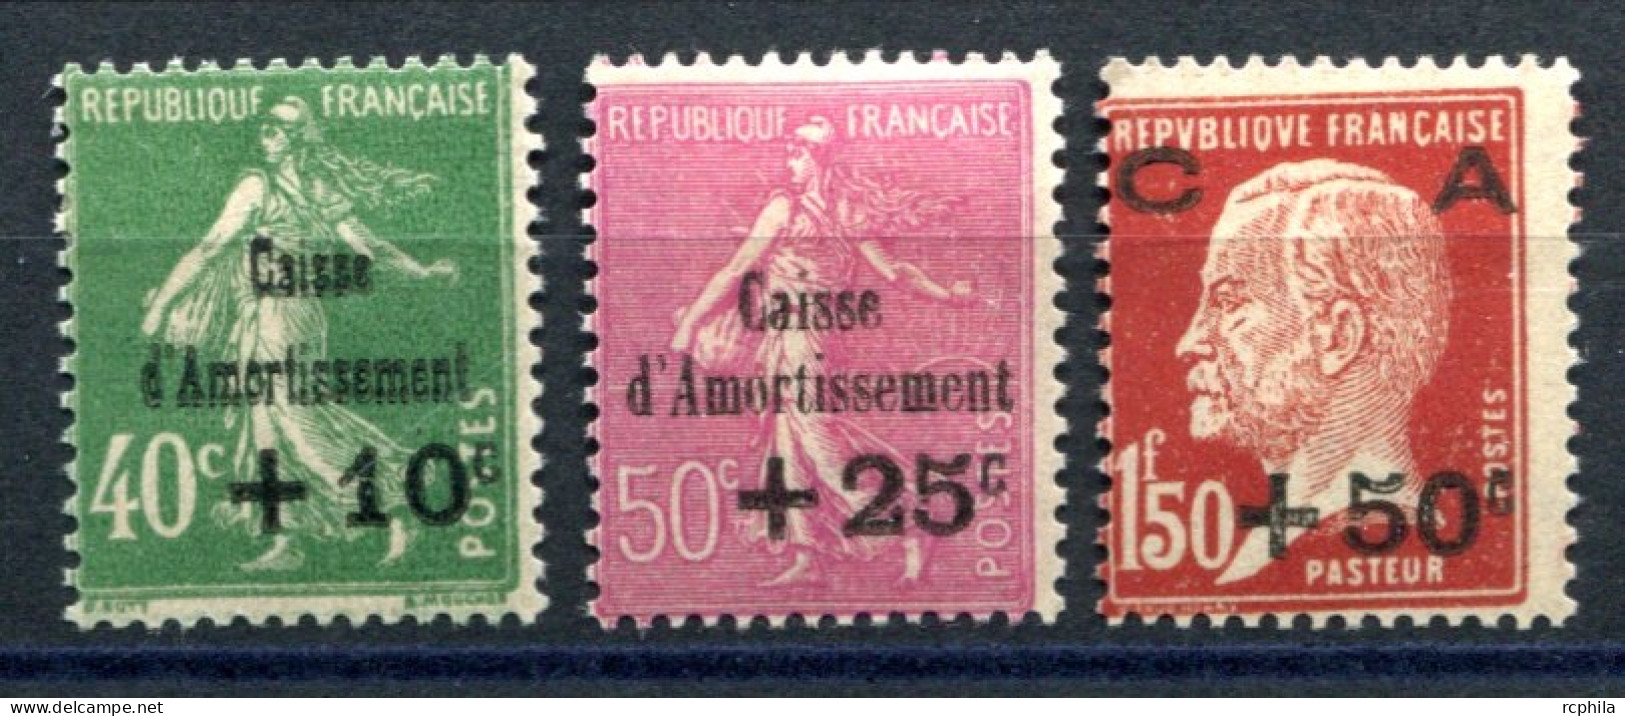 RC 27574 FRANCE COTE 120€ N° 253 / 255 SERIE CAISSE D'AMORTISSEMENT NEUF * MN TB - Nuevos